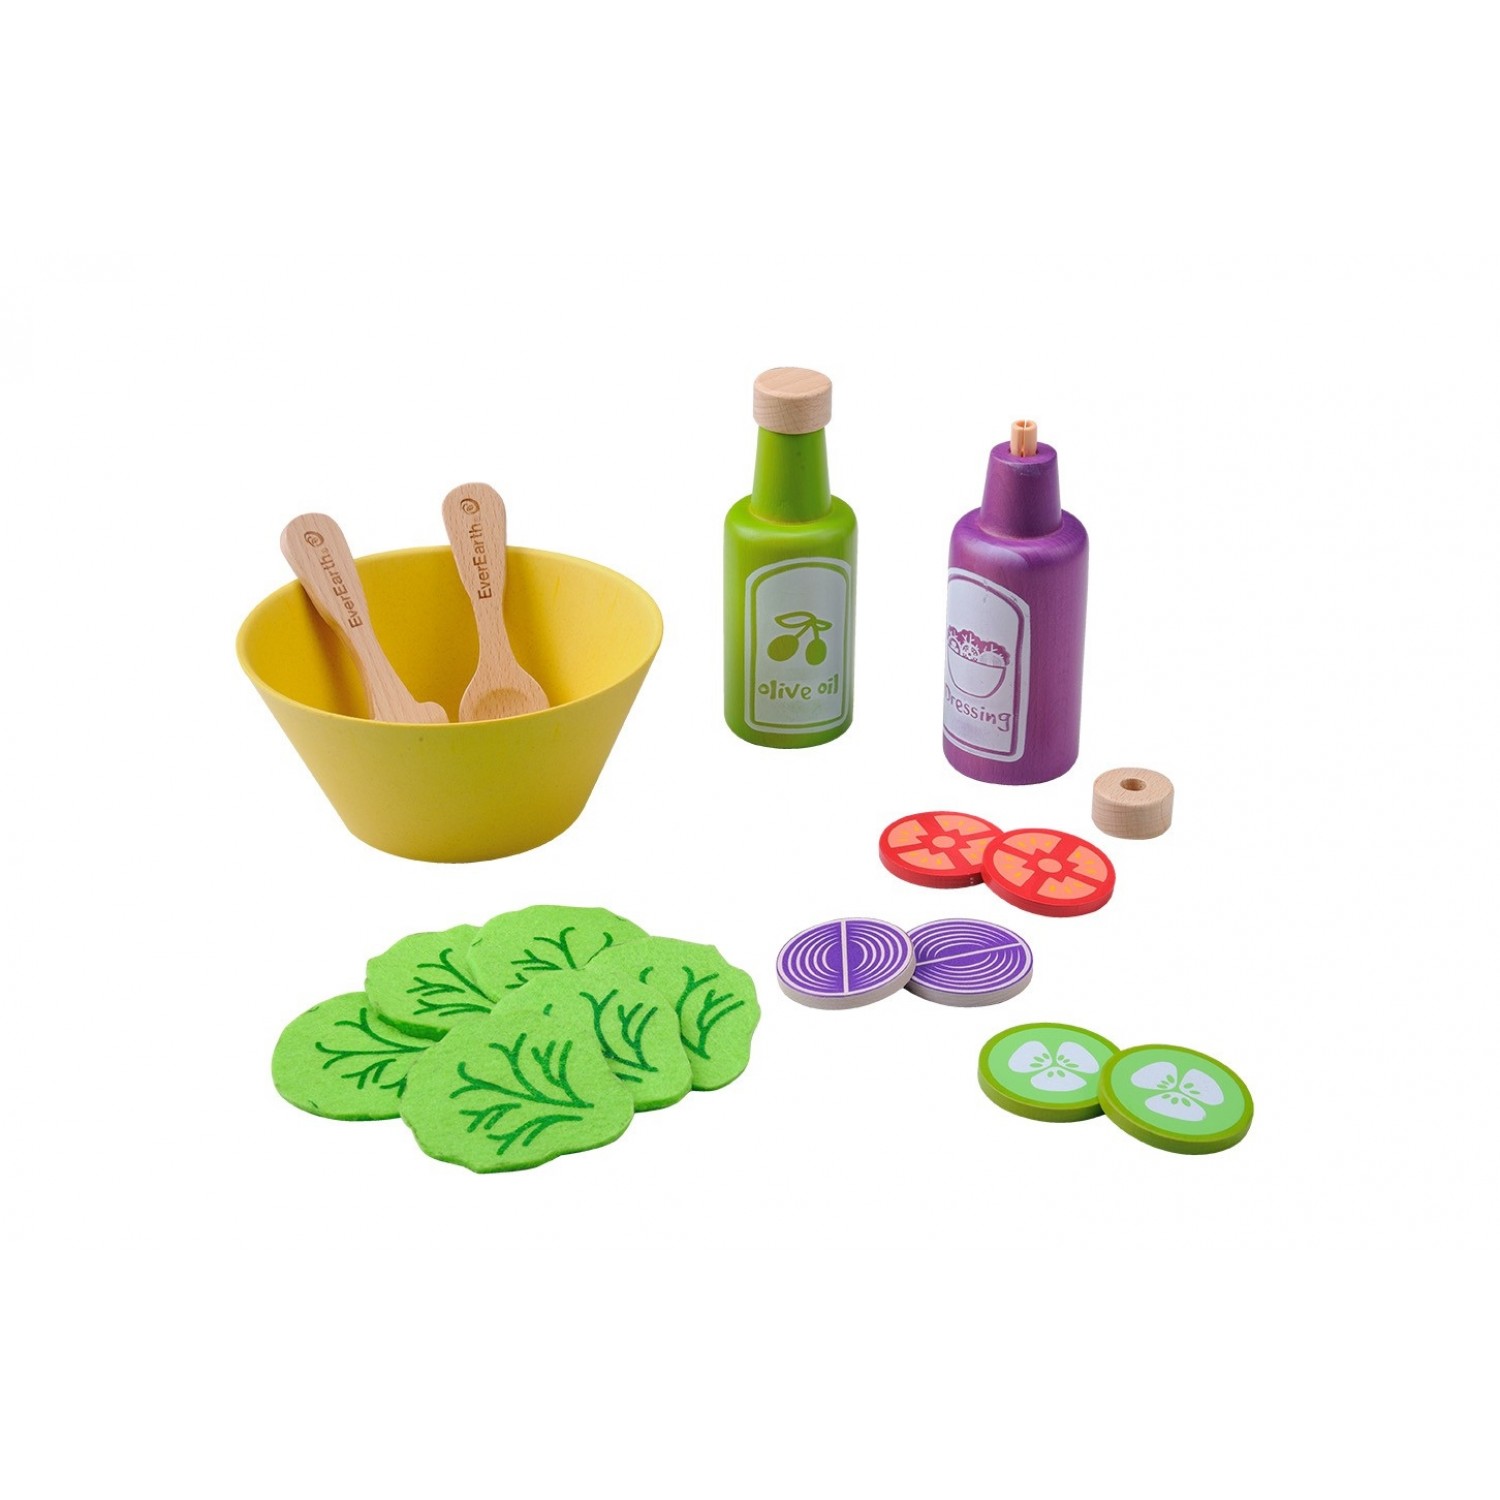 EverEarth Eco wooden educational toy “Salad Set”